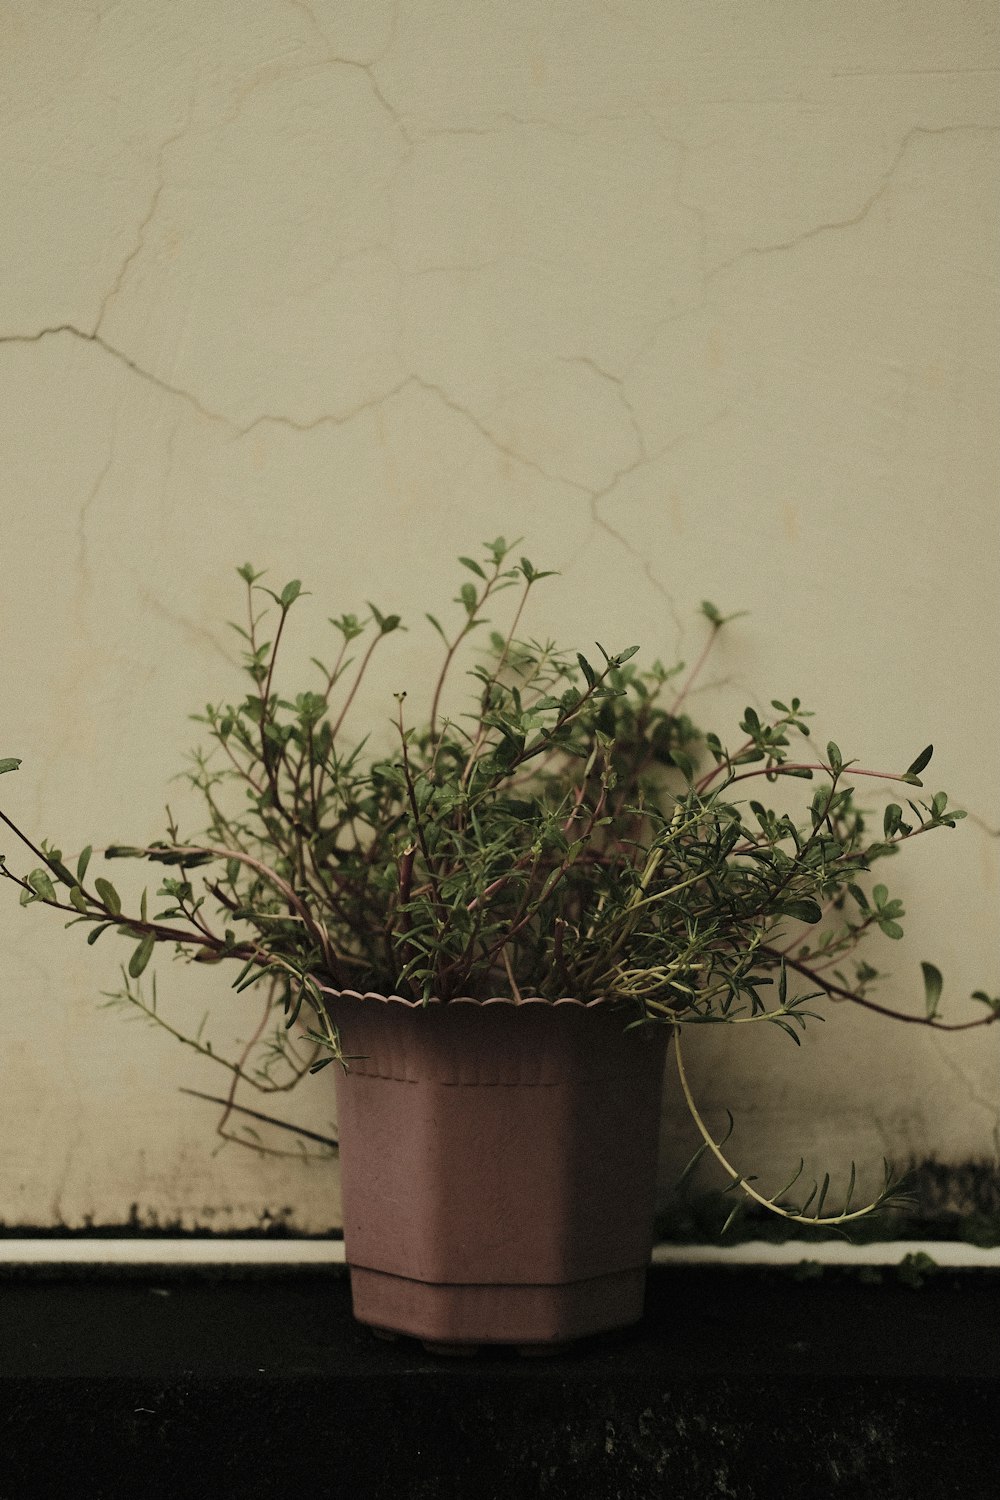 green plant on brown clay pot